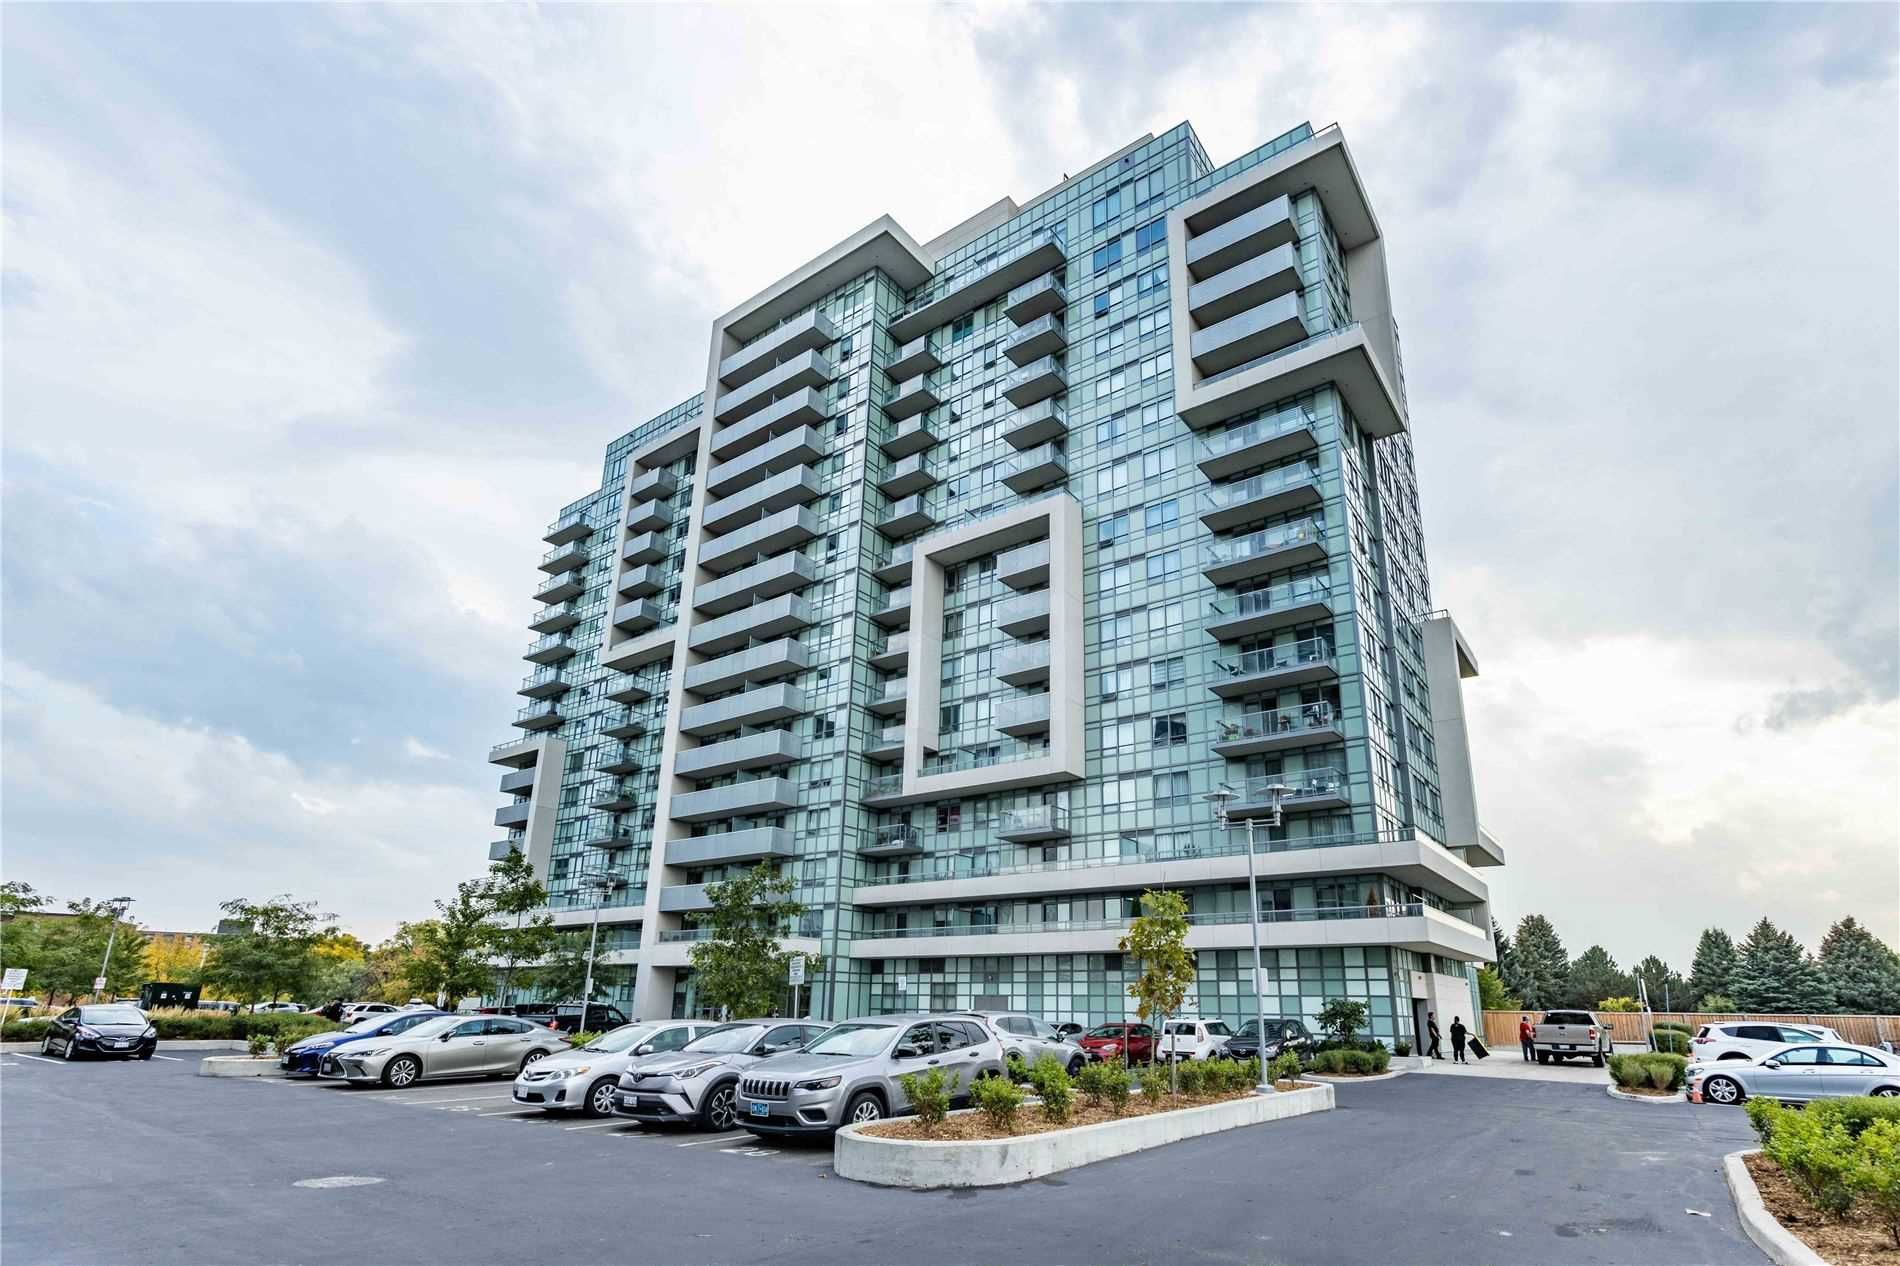 1346 Danforth Rd. This condo at Danforth Village Estates is located in  Scarborough, Toronto - image #1 of 2 by Strata.ca